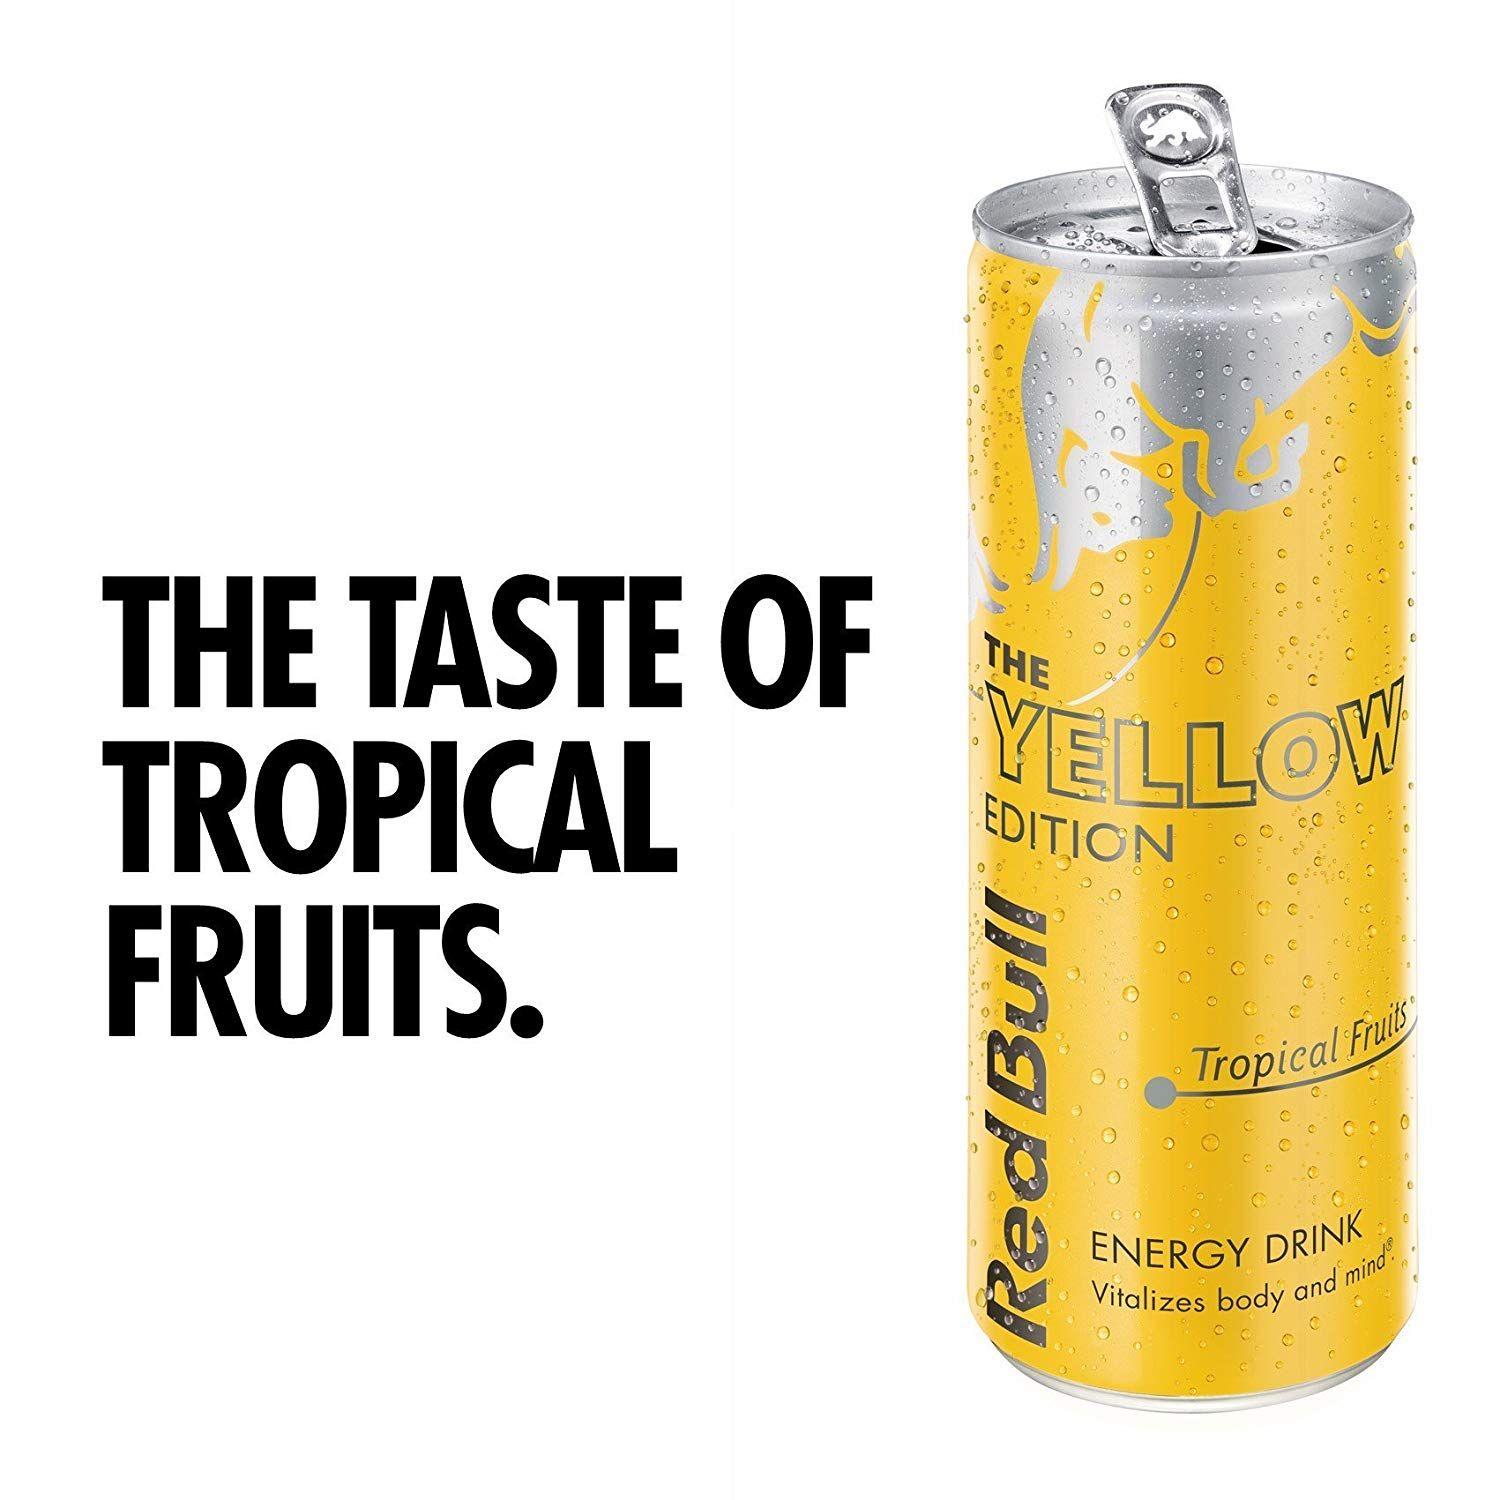 Red and Yellow Beverage Logo - Red Bull Energy Drink Tropical 12 Pack of 250 ml, Yellow Edition